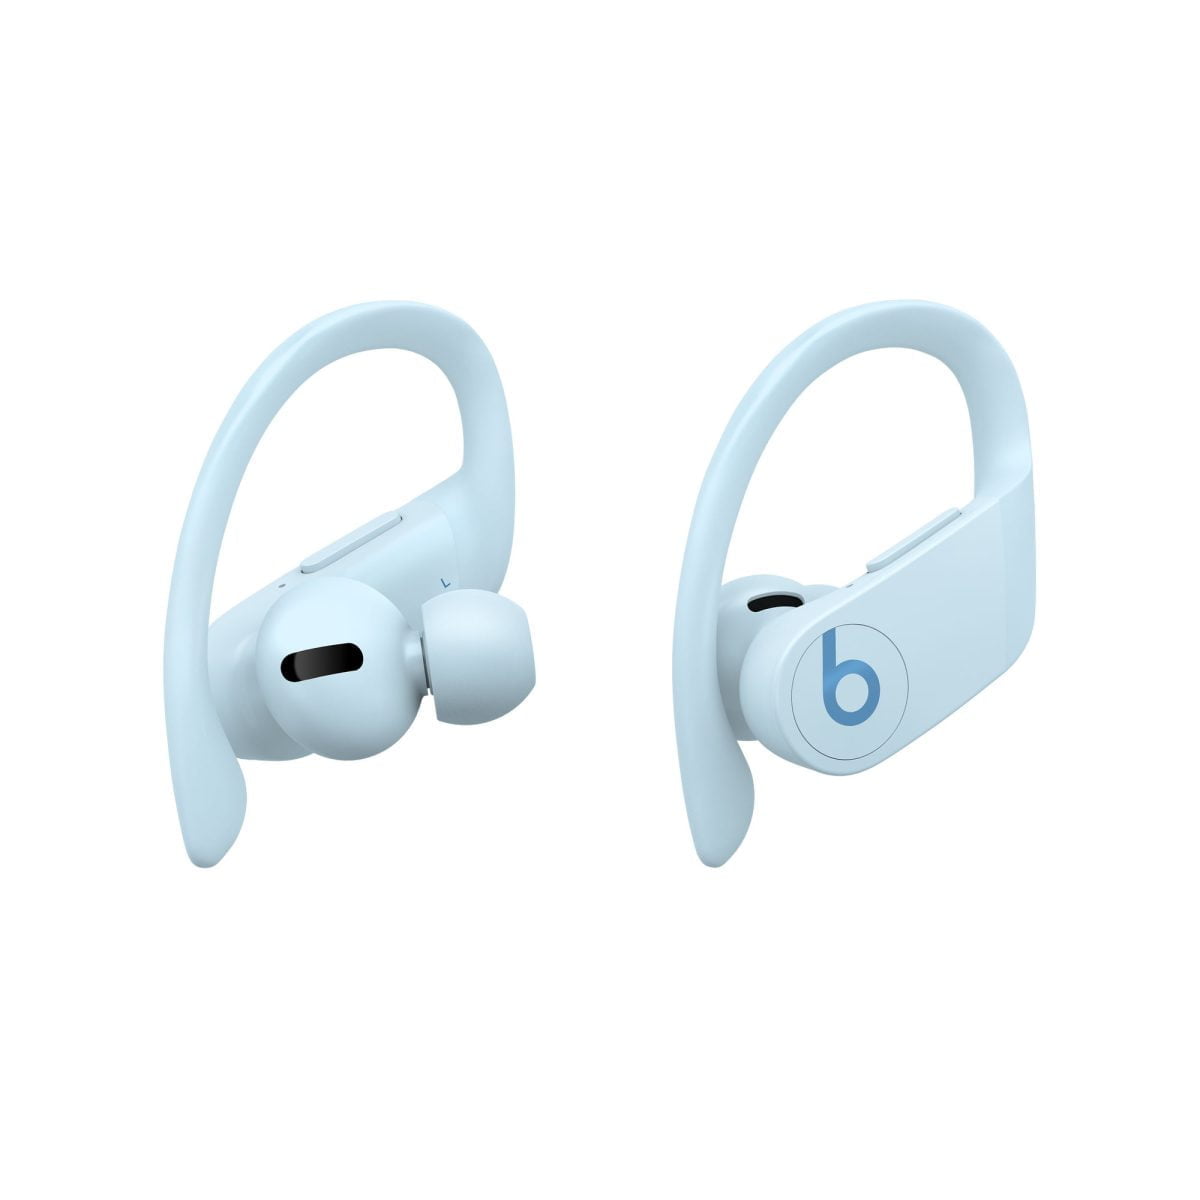 Mxy82 Av1 Apple &Lt;H1&Gt;&Lt;Span Class=&Quot;Pdp-Lrg-Header Rte-Plg-El&Quot;&Gt;Powerbeats Pro&Lt;/Span&Gt;&Lt;/H1&Gt; Totally Wireless Powerbeats Pro Earphones Are Built To Keep You Moving [Video Width=&Quot;1280&Quot; Height=&Quot;720&Quot; M4V=&Quot;Https://Lablaab.com/Wp-Content/Uploads/2020/10/Powerbeats-Pro-Totally-Wireless-Earphones-Black-Education-Apple-Ca.m4V&Quot;][/Video] &Lt;H2&Gt;&Lt;Span Style=&Quot;Color: #1B1919;Font-Size: 24Px&Quot;&Gt;Made For Movement&Lt;/Span&Gt;&Lt;/H2&Gt; &Lt;Div&Gt; &Lt;Span Class=&Quot;Pdp-Lrg-Body Rte-Plg-El&Quot;&Gt;Adjustable, Secure-Fit Earhooks Stay In Place With Multiple Eartip Options, And Are Made To Move With You, No Matter Where You Go.&Lt;/Span&Gt; &Lt;/Div&Gt; &Lt;Div&Gt; &Lt;H2&Gt;&Lt;Span Class=&Quot;Pdp-Lrg-Body Rte-Plg-El&Quot;&Gt;Sweat &Amp; Water-Resistant&Lt;/Span&Gt;&Lt;/H2&Gt; &Lt;Span Class=&Quot;Pdp-Lrg-Body Rte-Plg-El&Quot;&Gt;Reinforced Design For Sweat And Water Resistance Help You Make It Through Whatever Your Day Brings.&Lt;/Span&Gt; &Lt;/Div&Gt; &Lt;Div&Gt; &Lt;H2&Gt;&Lt;Span Class=&Quot;Pdp-Lrg-Body Rte-Plg-El&Quot;&Gt;Up To 9 Hours Of Listening Time&Lt;/Span&Gt;&Lt;/H2&Gt; &Lt;Span Class=&Quot;Pdp-Lrg-Body Rte-Plg-El&Quot;&Gt;Get More Than 24 Hours Of Combined Playback With The Charging Case, And Use 5-Minute Fast Fuel For 1.5 Hours Of Playback When Battery Is Low&Lt;Sup&Gt;1&Lt;/Sup&Gt;.&Lt;/Span&Gt; &Lt;/Div&Gt; &Lt;Div&Gt; &Lt;H2&Gt;&Lt;Span Class=&Quot;Pdp-Lrg-Body Rte-Plg-El&Quot;&Gt;Play One Side Or Both&Lt;/Span&Gt;&Lt;/H2&Gt; &Lt;Span Class=&Quot;Pdp-Lrg-Body Rte-Plg-El&Quot;&Gt;Auto Play/Pause, Independent Earbud Connection Via The Apple H1 Chip, And Full Volume And Track Controls On Each Earbud Mean You’re In Charge Of How You Listen.&Lt;/Span&Gt; &Lt;/Div&Gt; &Lt;H3 Class=&Quot;Pdp-Detail-Title Pdp-Lrg-Body-B&Quot;&Gt;In The Box&Lt;/H3&Gt; &Lt;Div&Gt; &Lt;Ul Class=&Quot;Pdp-Lrg-Body&Quot;&Gt; &Lt;Li&Gt;Powerbeats Pro Totally Wireless Earphones&Lt;/Li&Gt; &Lt;Li&Gt;Charging Case&Lt;/Li&Gt; &Lt;Li&Gt;Eartips With Four Size Options&Lt;/Li&Gt; &Lt;Li&Gt;Lightning To Usb-A Charging Cable&Lt;/Li&Gt; &Lt;Li&Gt;Quick Start Guide&Lt;/Li&Gt; &Lt;Li&Gt;Warranty Card (One Year Manufacturer Warranty)&Lt;/Li&Gt; &Lt;/Ul&Gt; &Lt;/Div&Gt; Powerbeats Pro In-Ear Wireless Headphones Beats By Dr. Dre - Glacier Blue